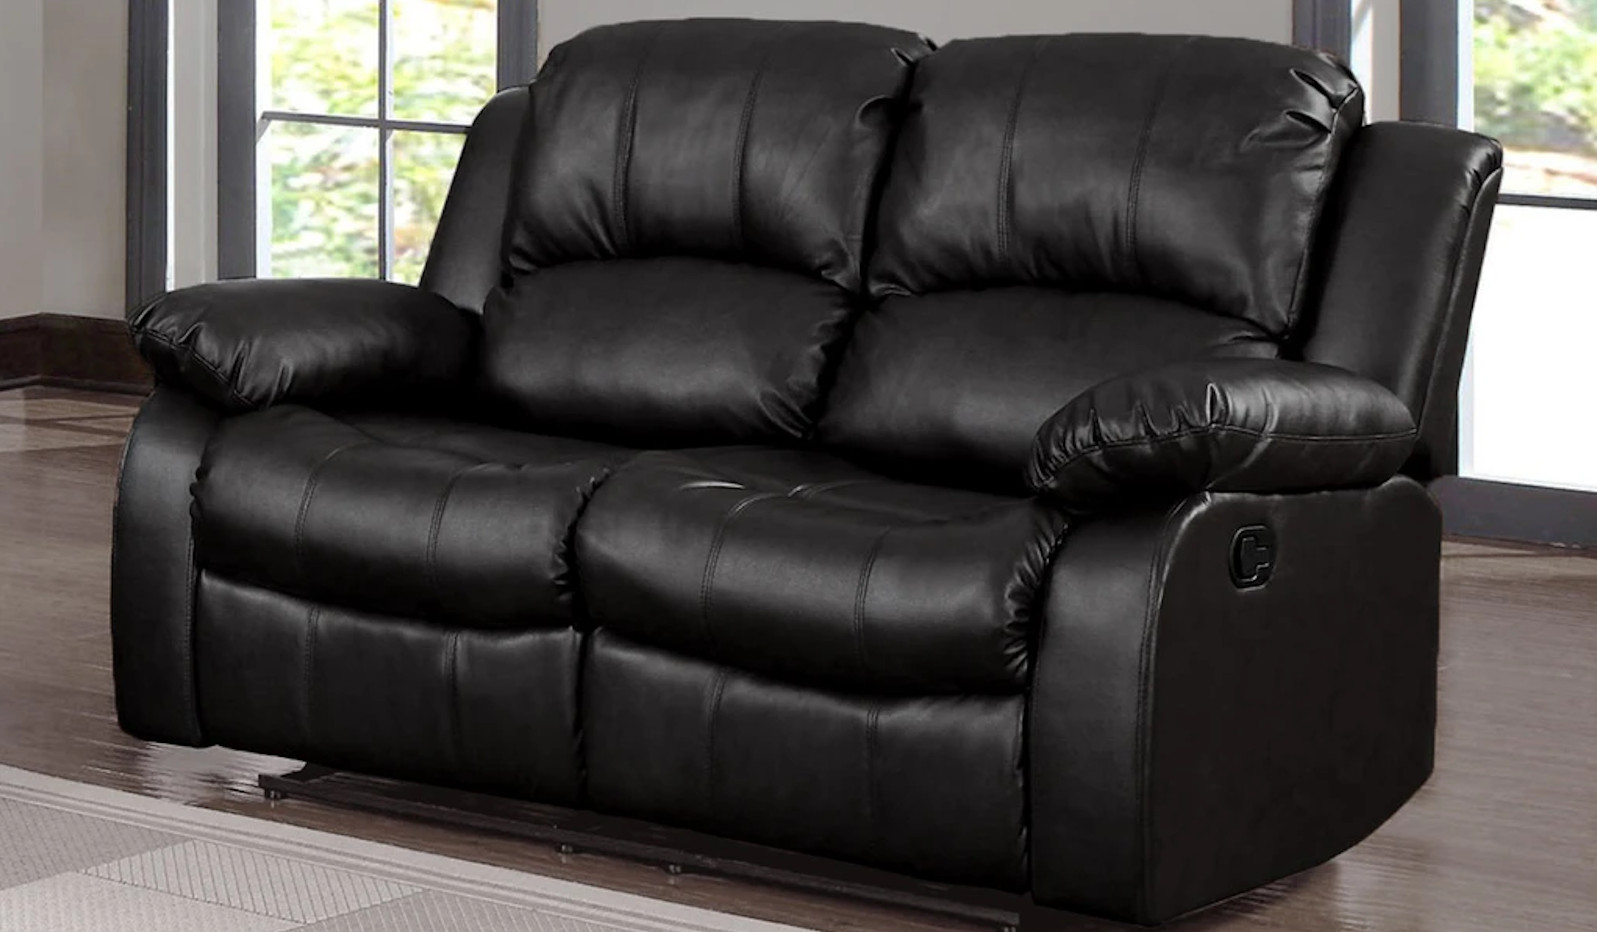 Low price recliners